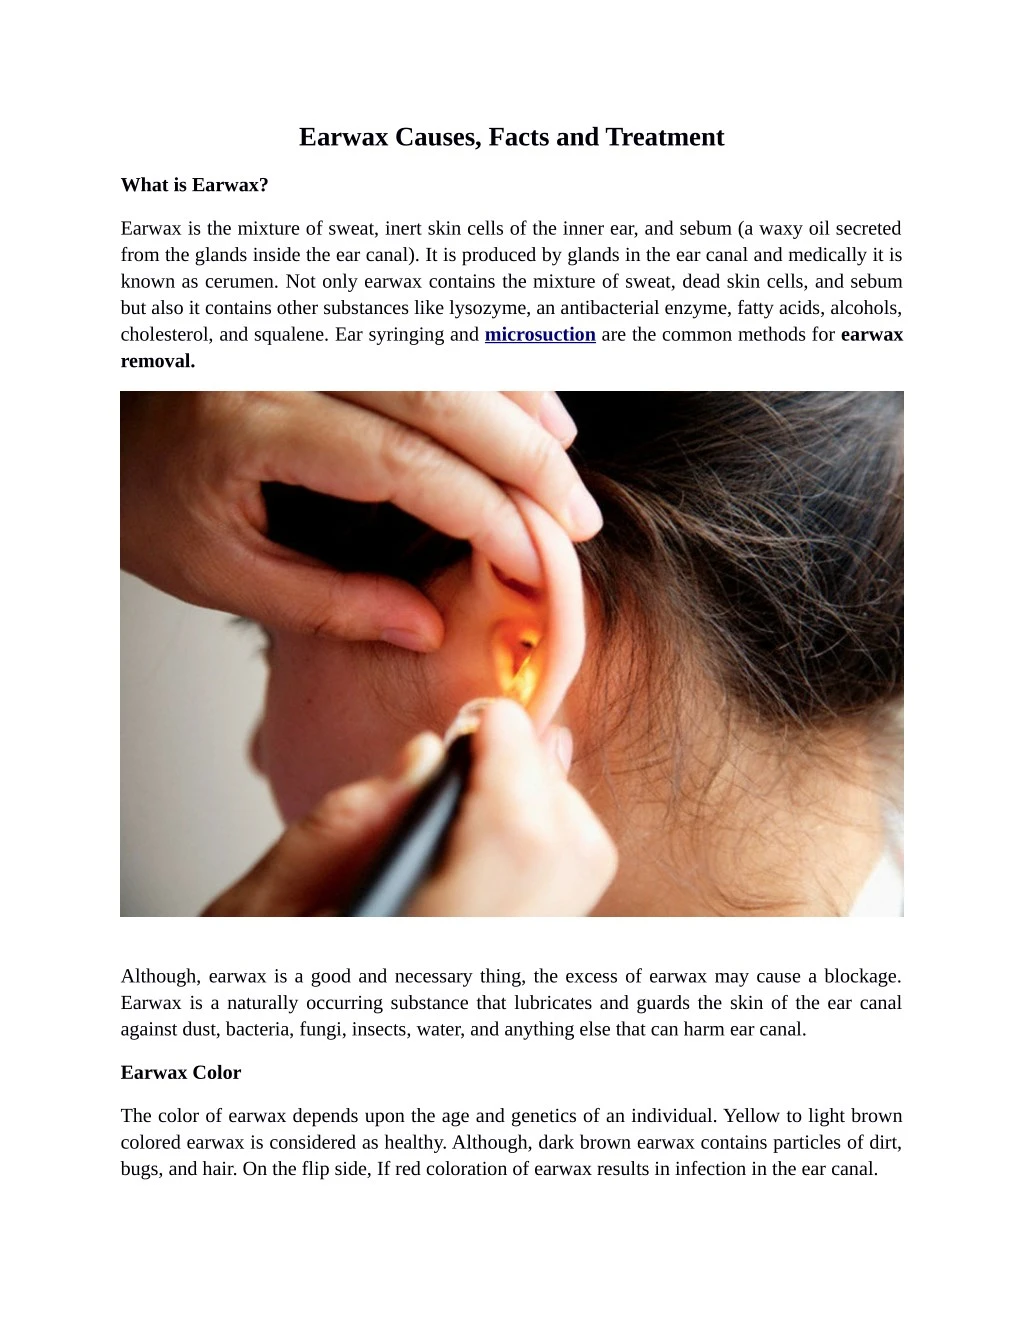 earwax causes facts and treatment